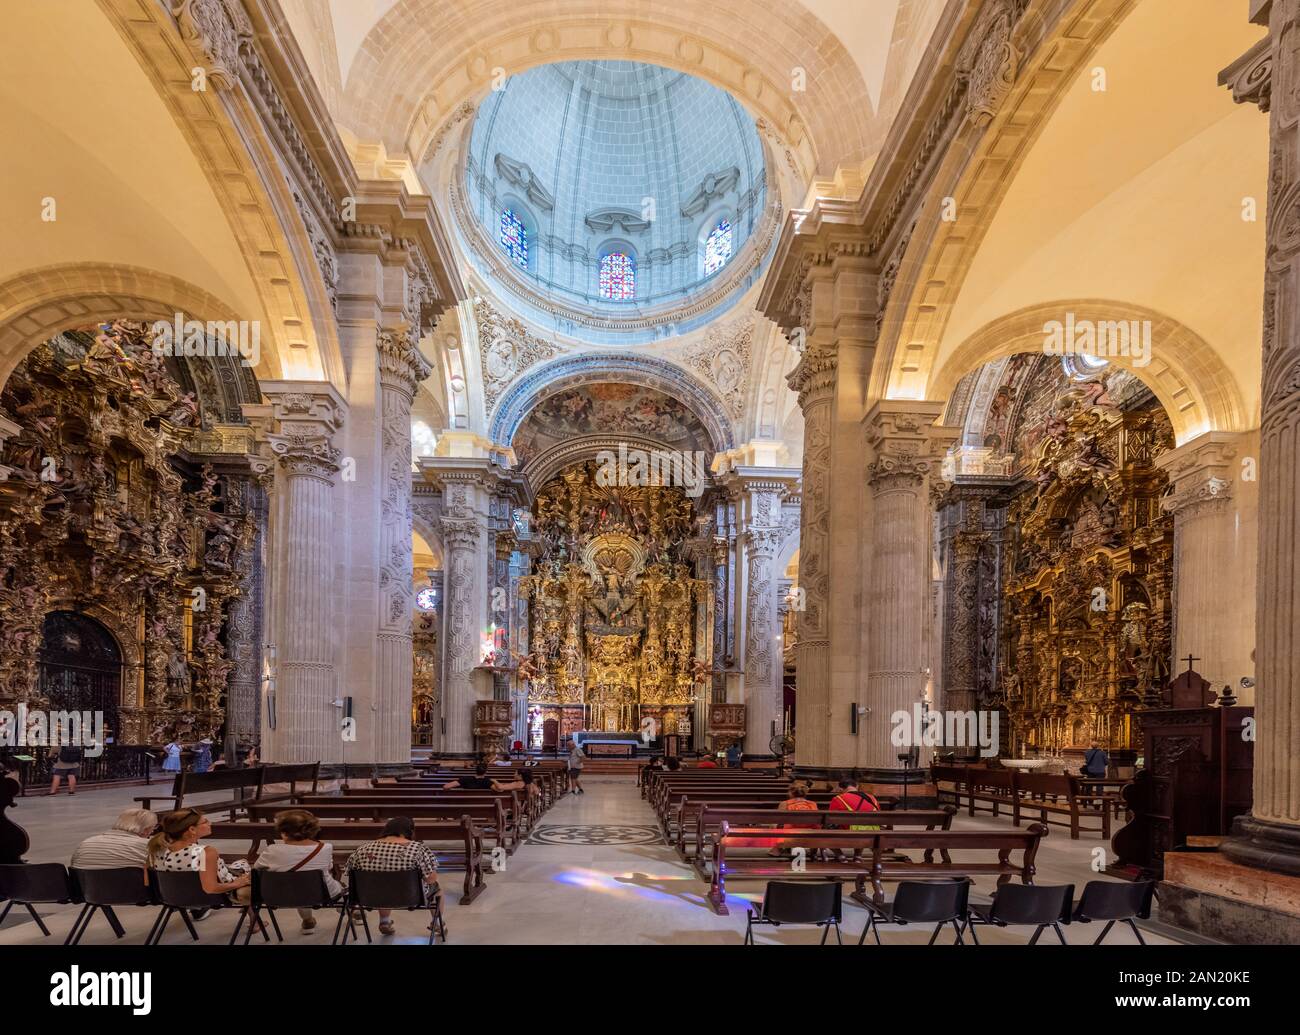 The Main Chapel, Sacristy vault and three of the 14 magnificent Altarpieces in Iglesia Colegial del Salvado, Seville Stock Photo